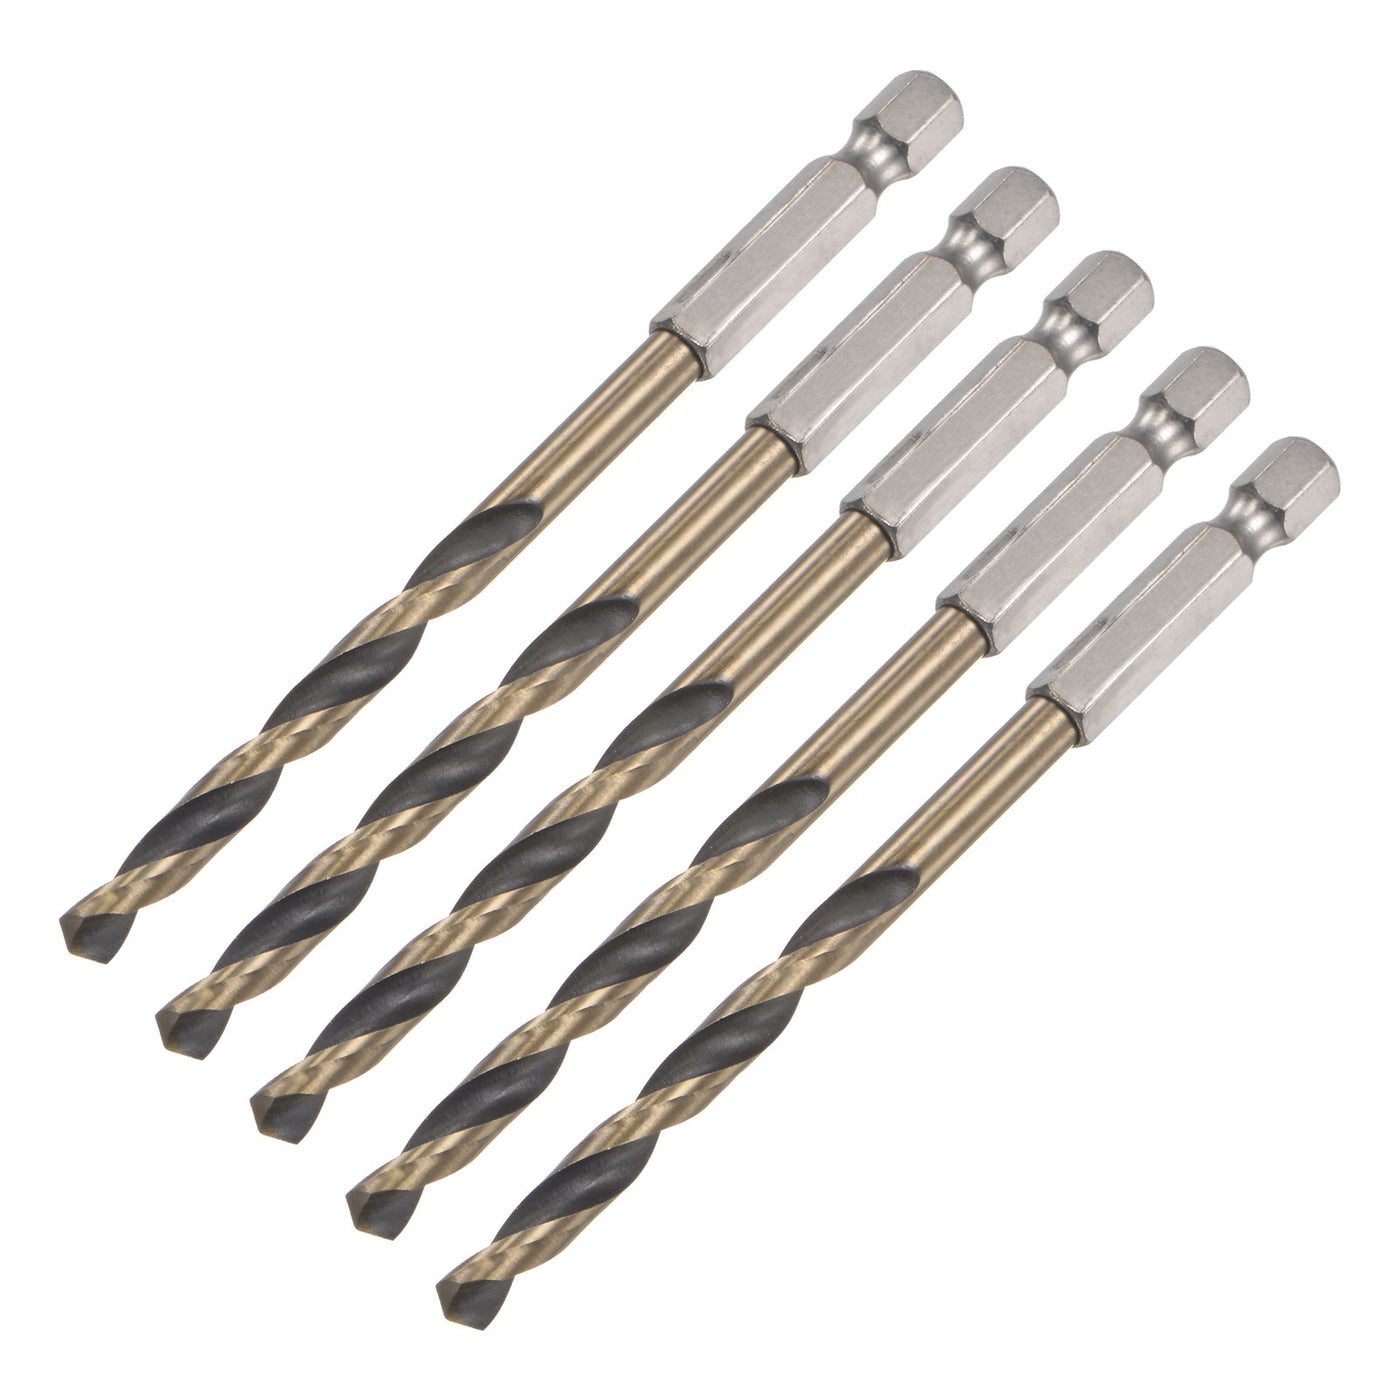 uxcell Uxcell 5Pcs 5.2mm High Speed Steel Twist Drill Bit with Hex Shank 104mm Length